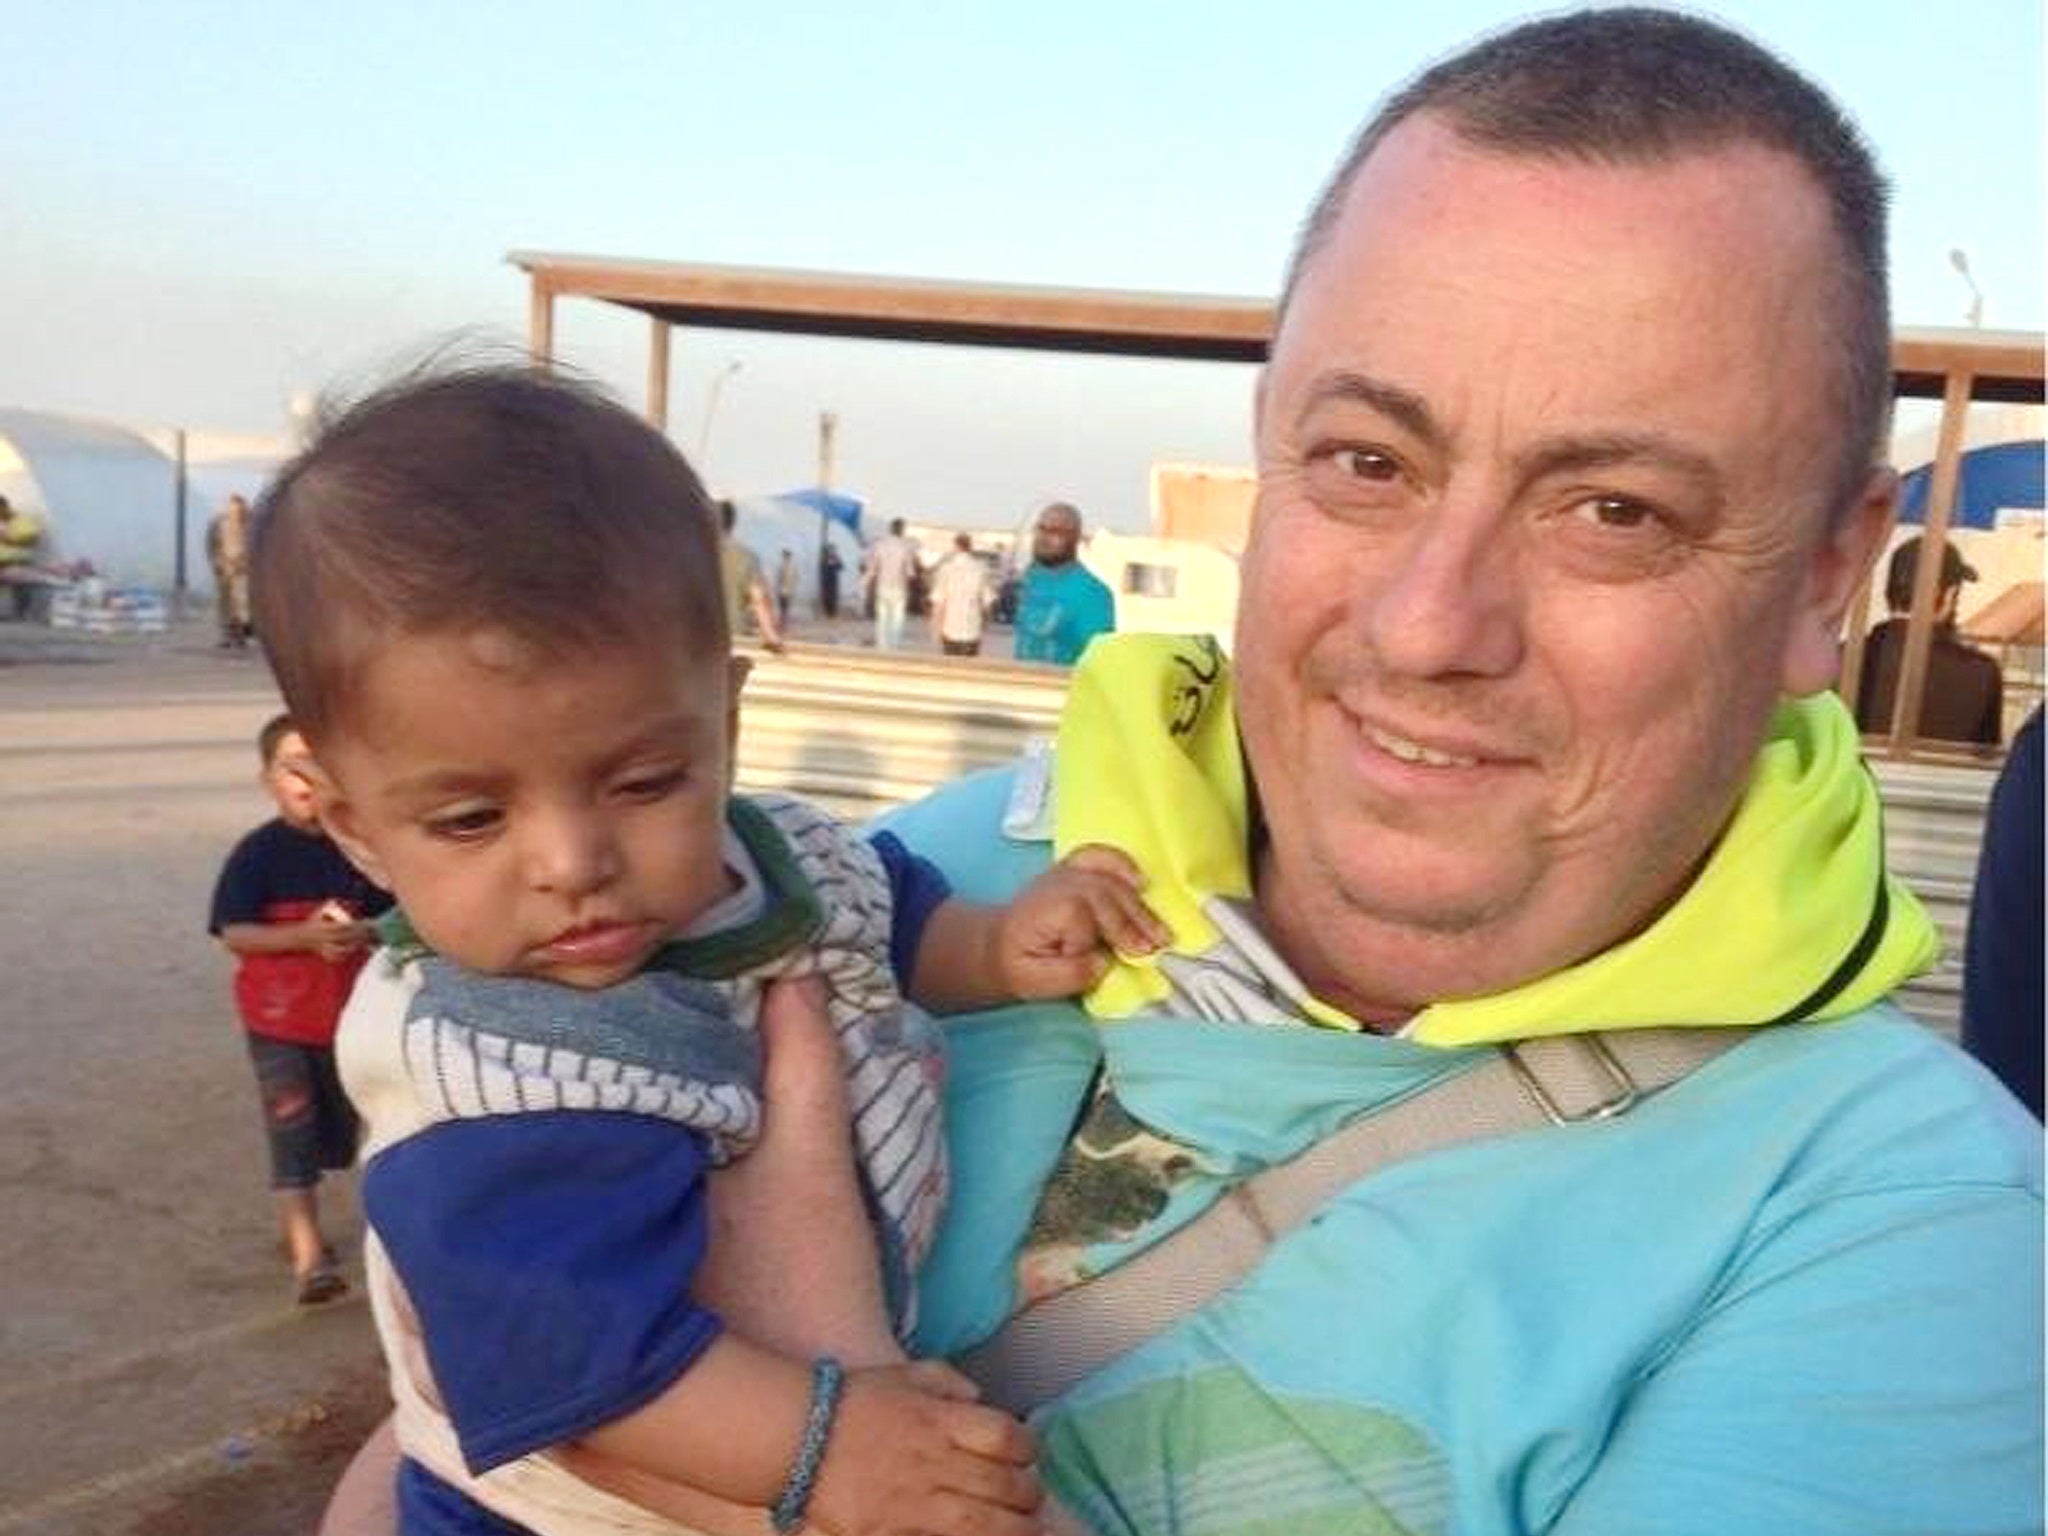 Aid worker Alan Henning was kidnapped in Syria in December